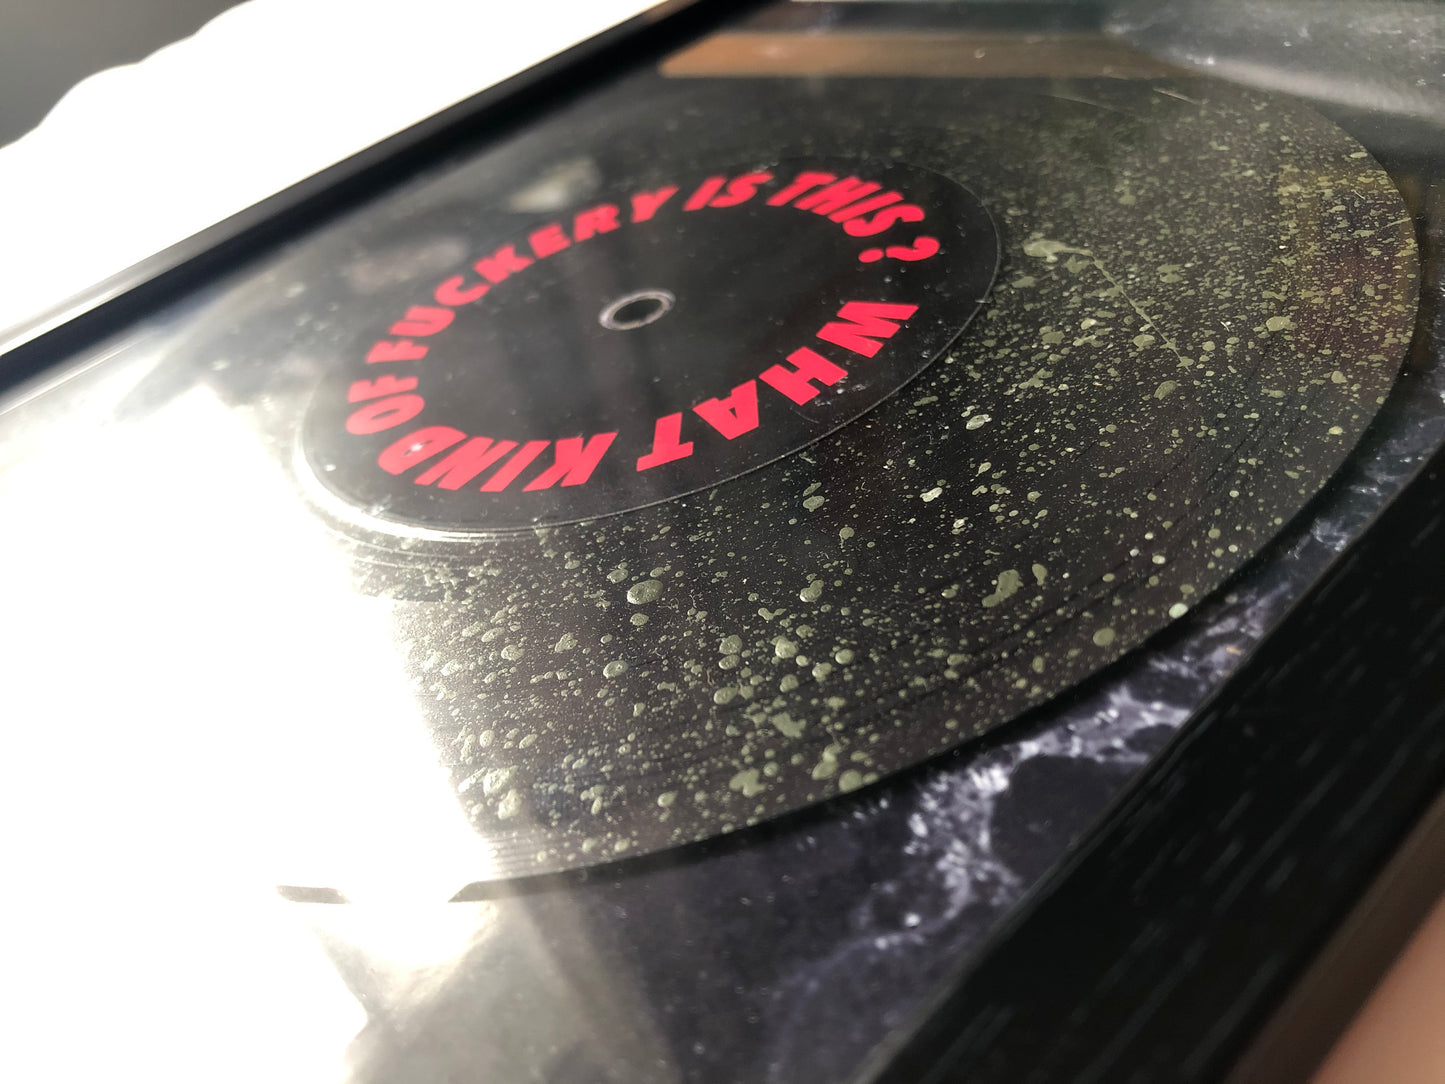 WHAT KIND OF FUCKERY IS THIS ? VINYL